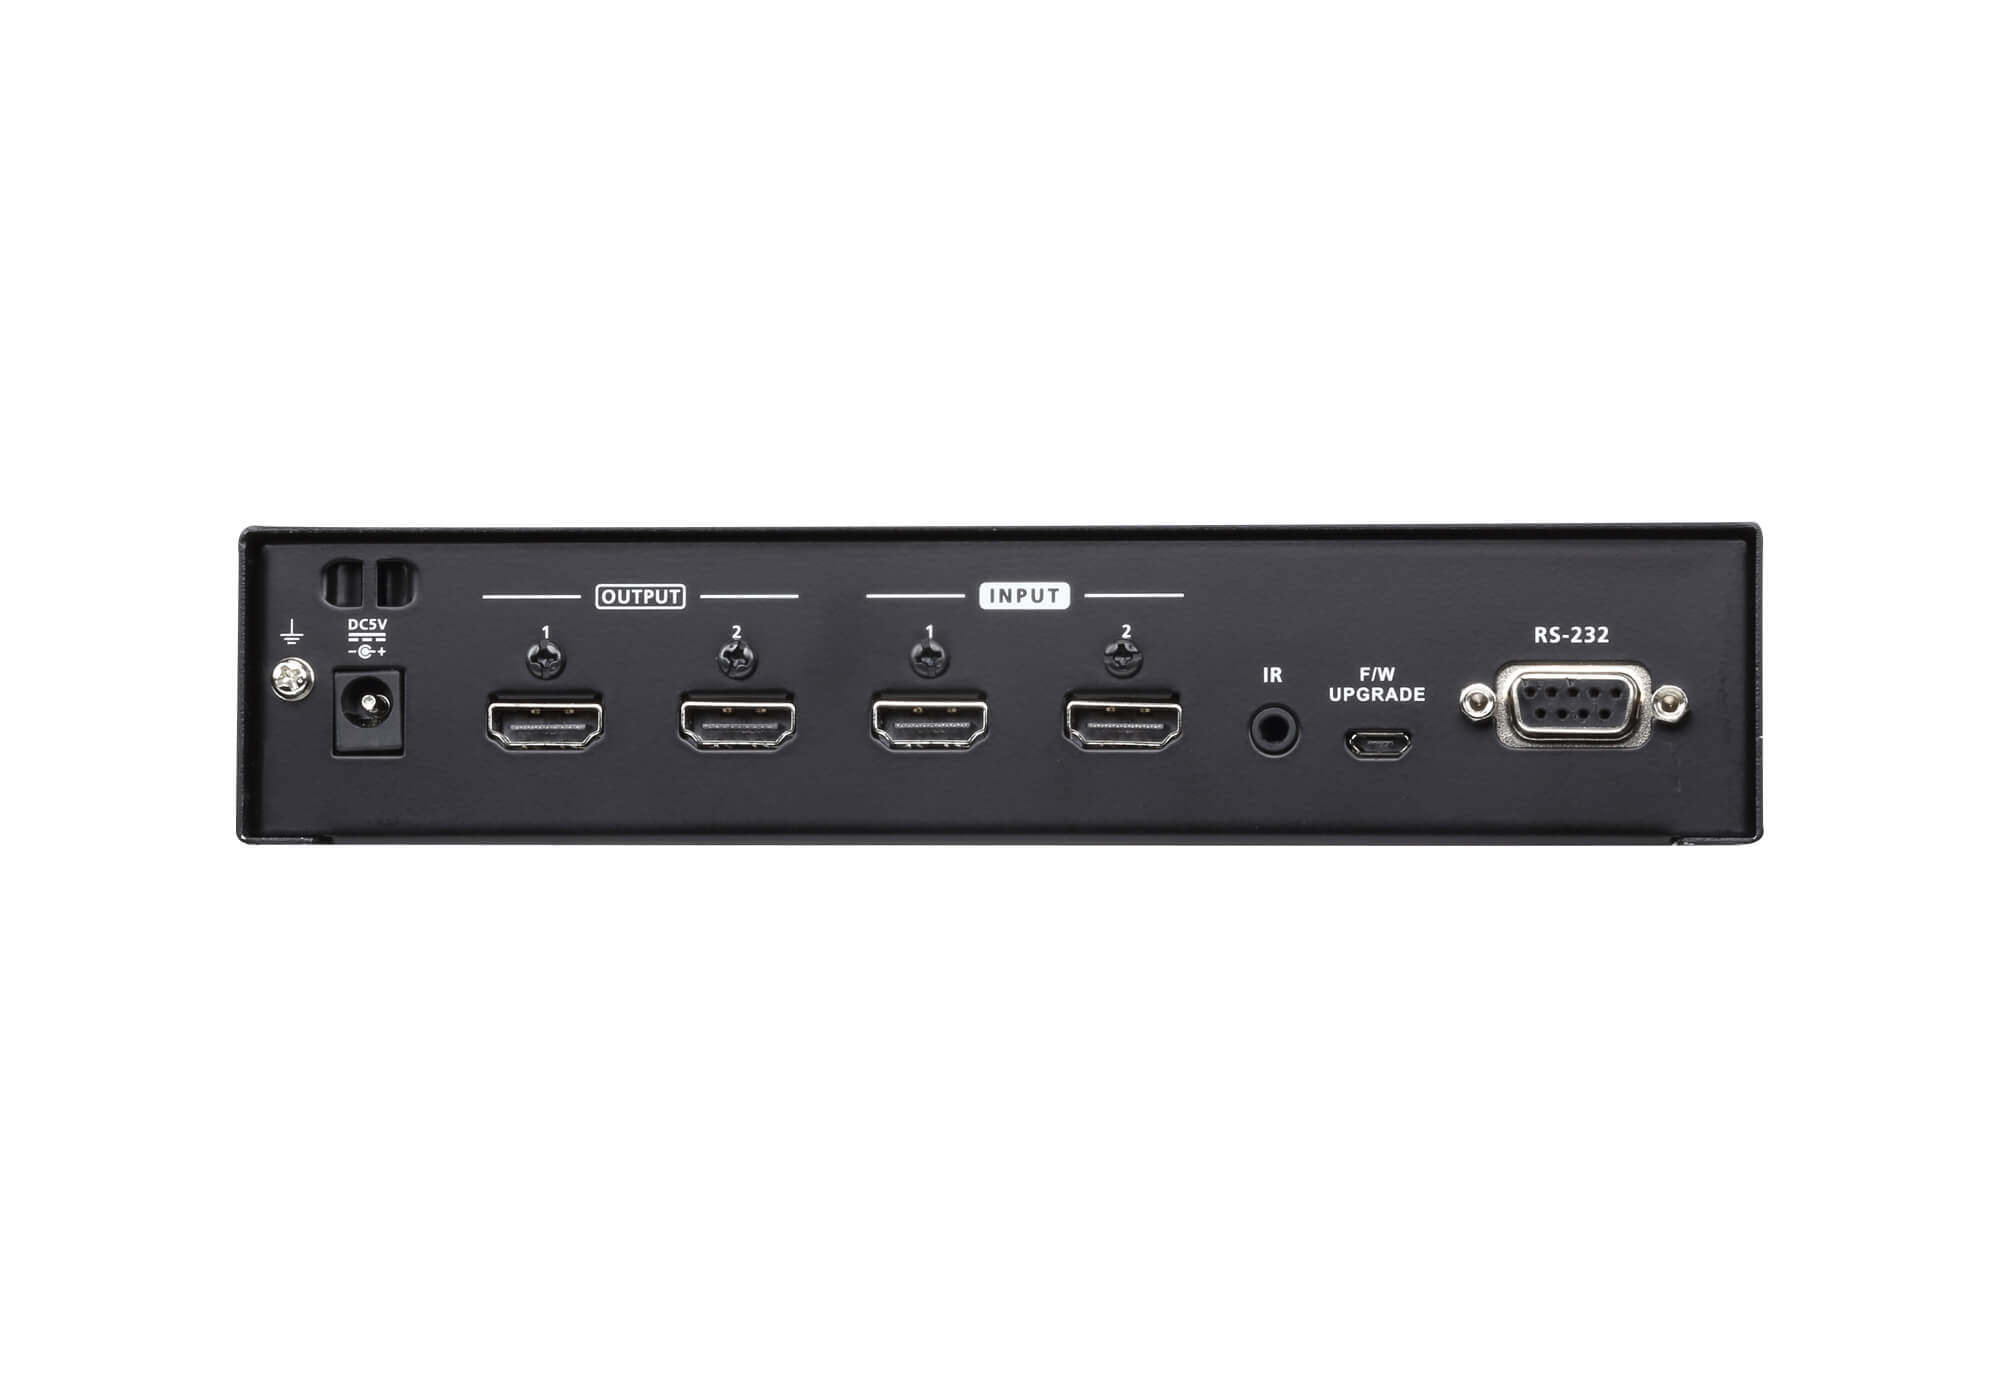 Aten 2×2 4K HDMI Matrix, control via front-panel pushbuttons, IR remote and RS232 control, EDID management